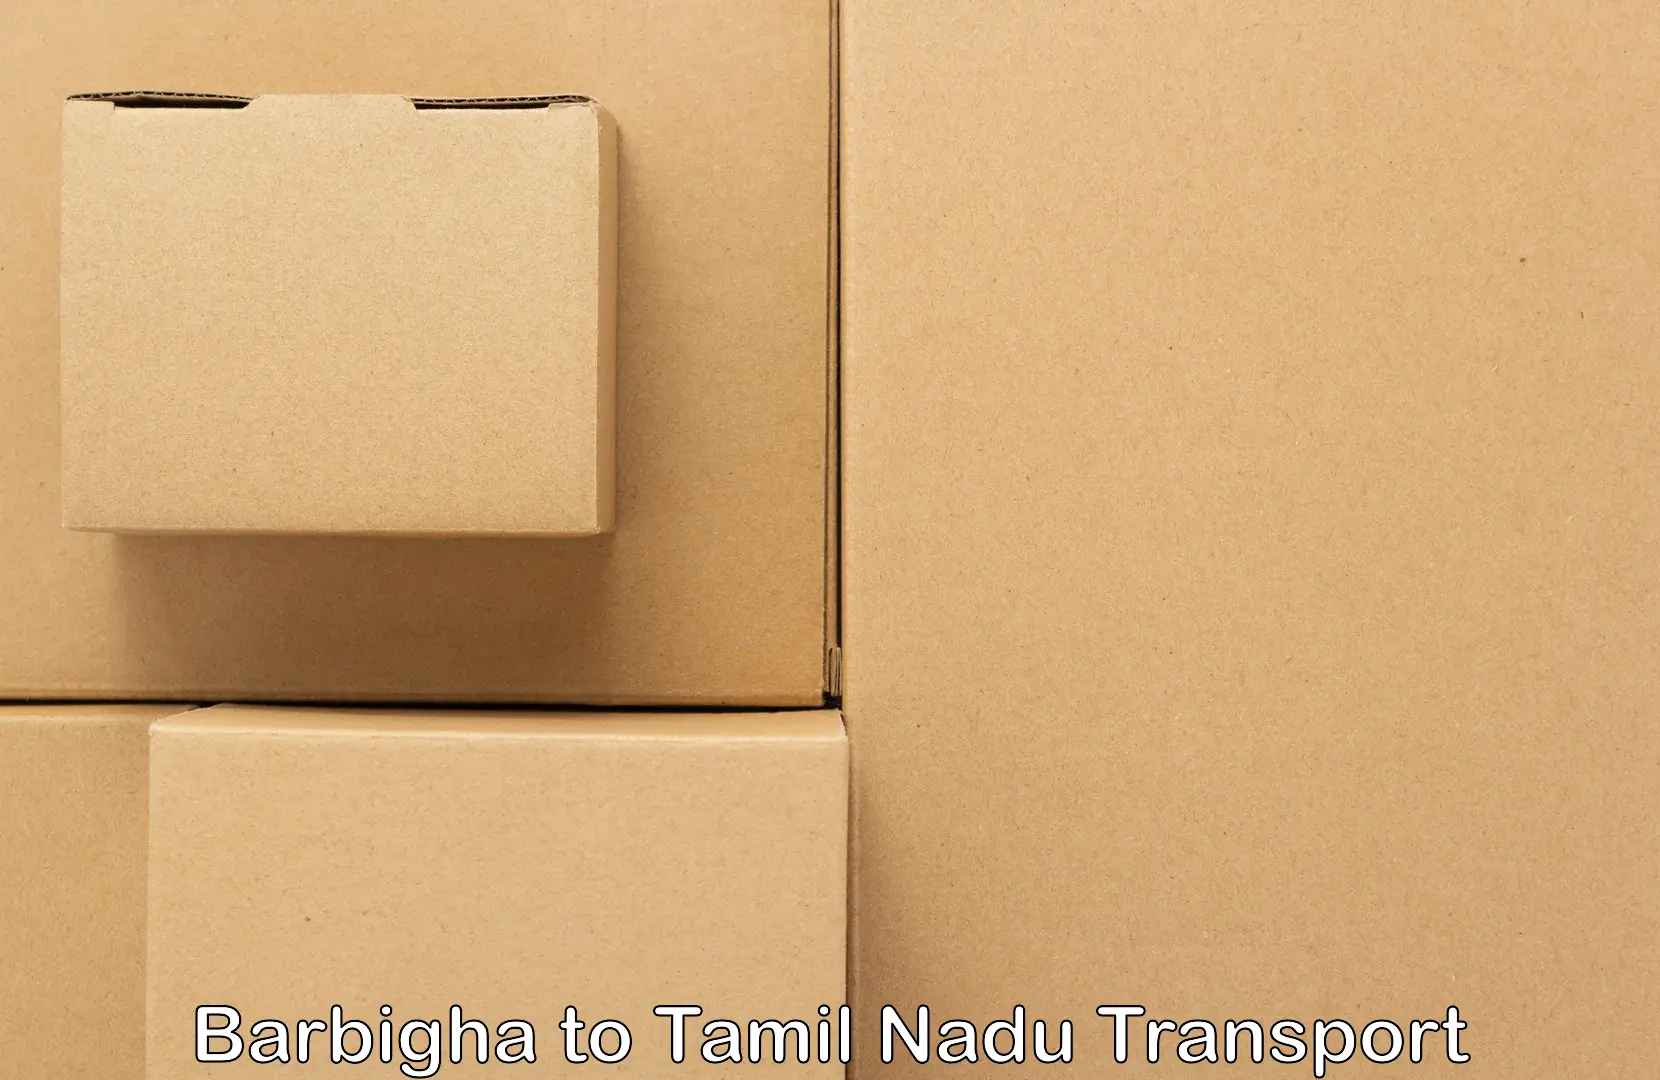 Express transport services in Barbigha to Trichy